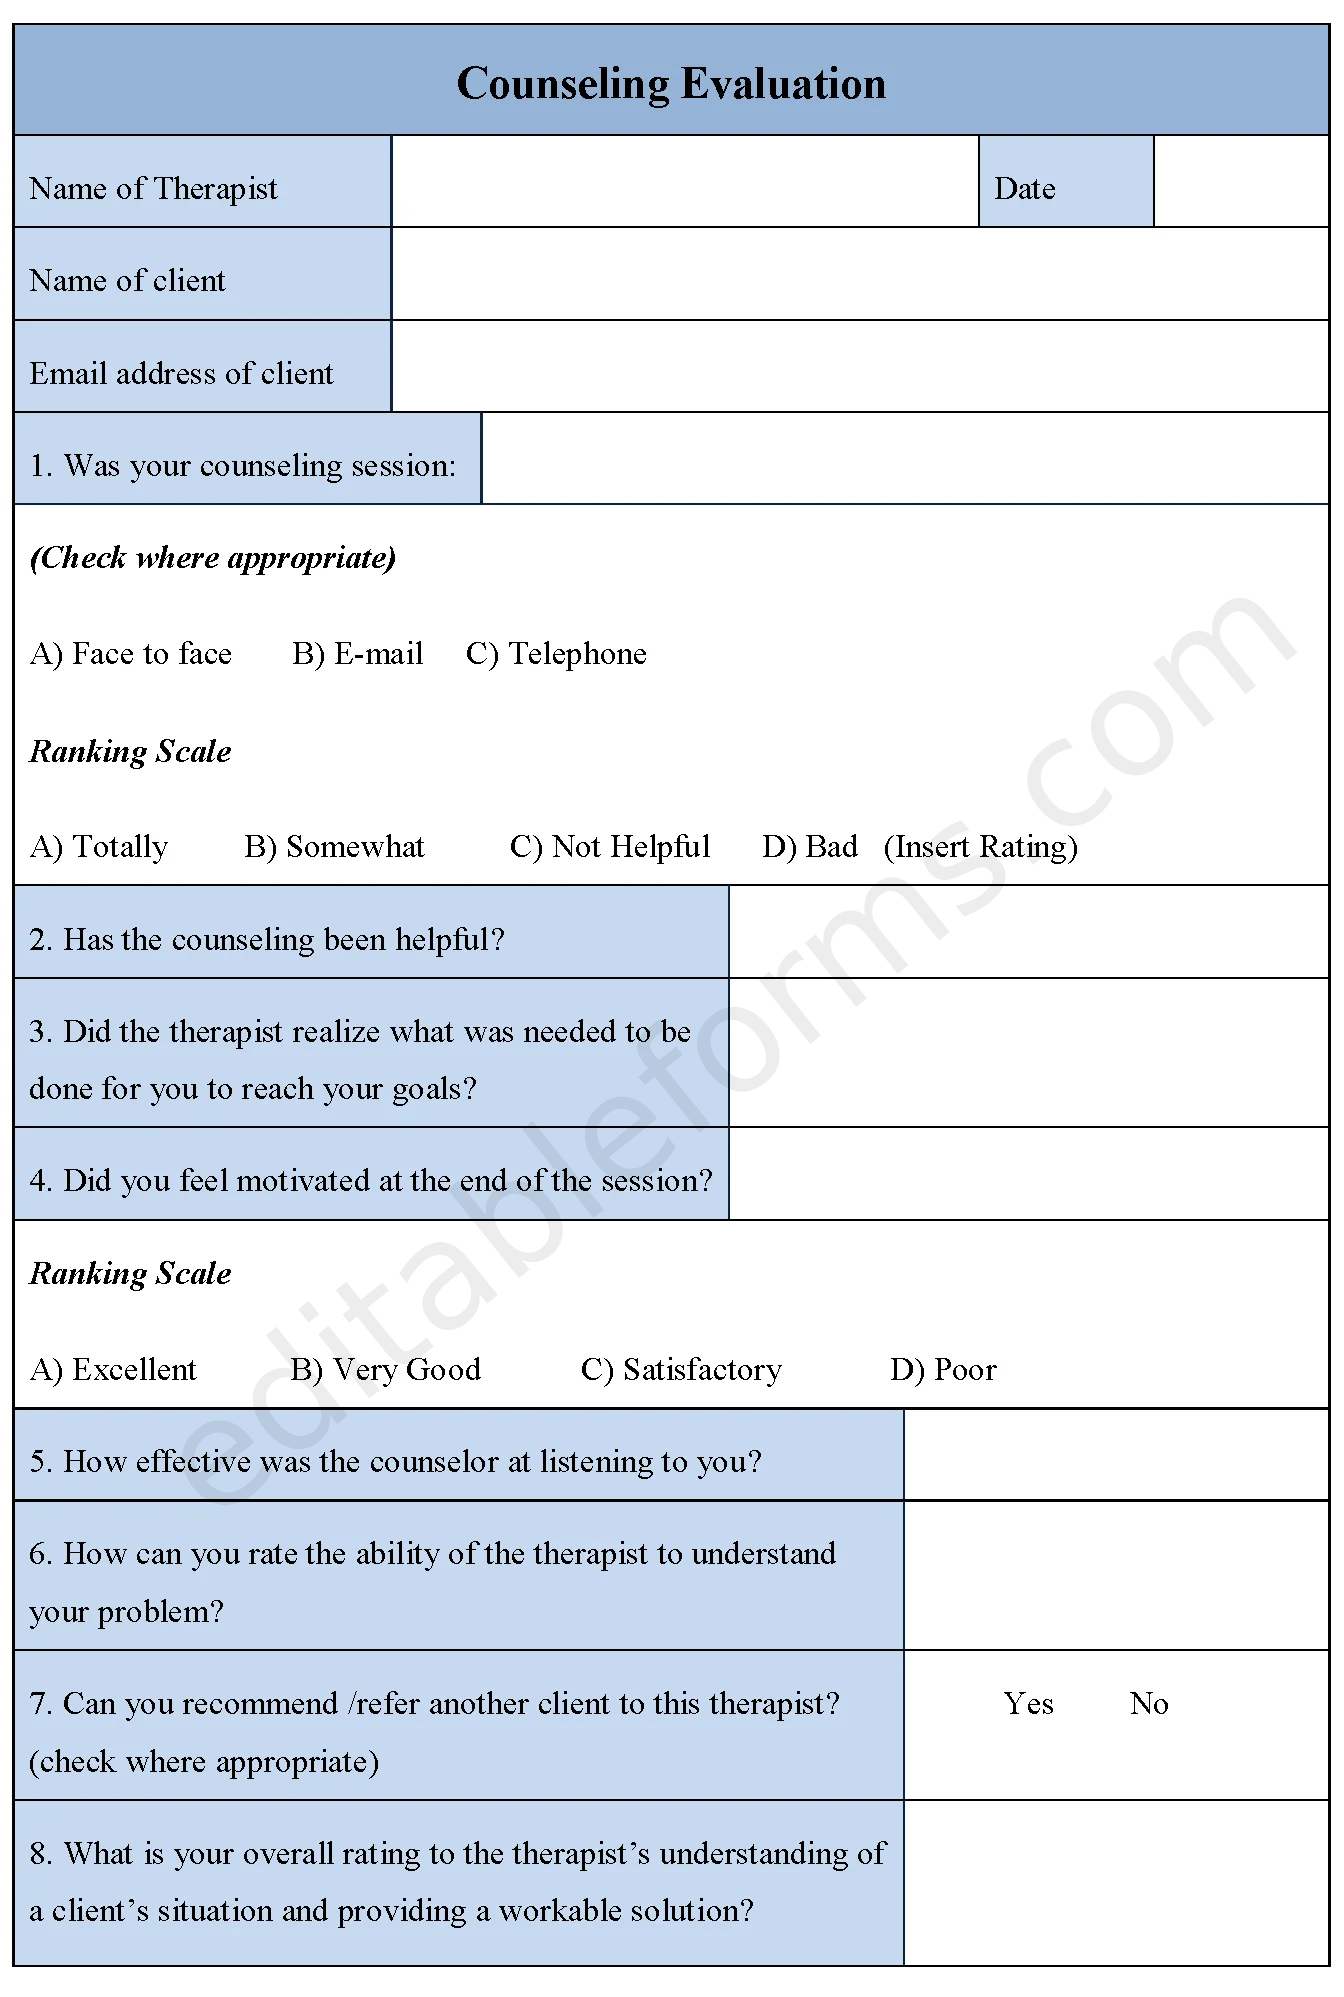 Counseling Evaluation Fillable PDF Template